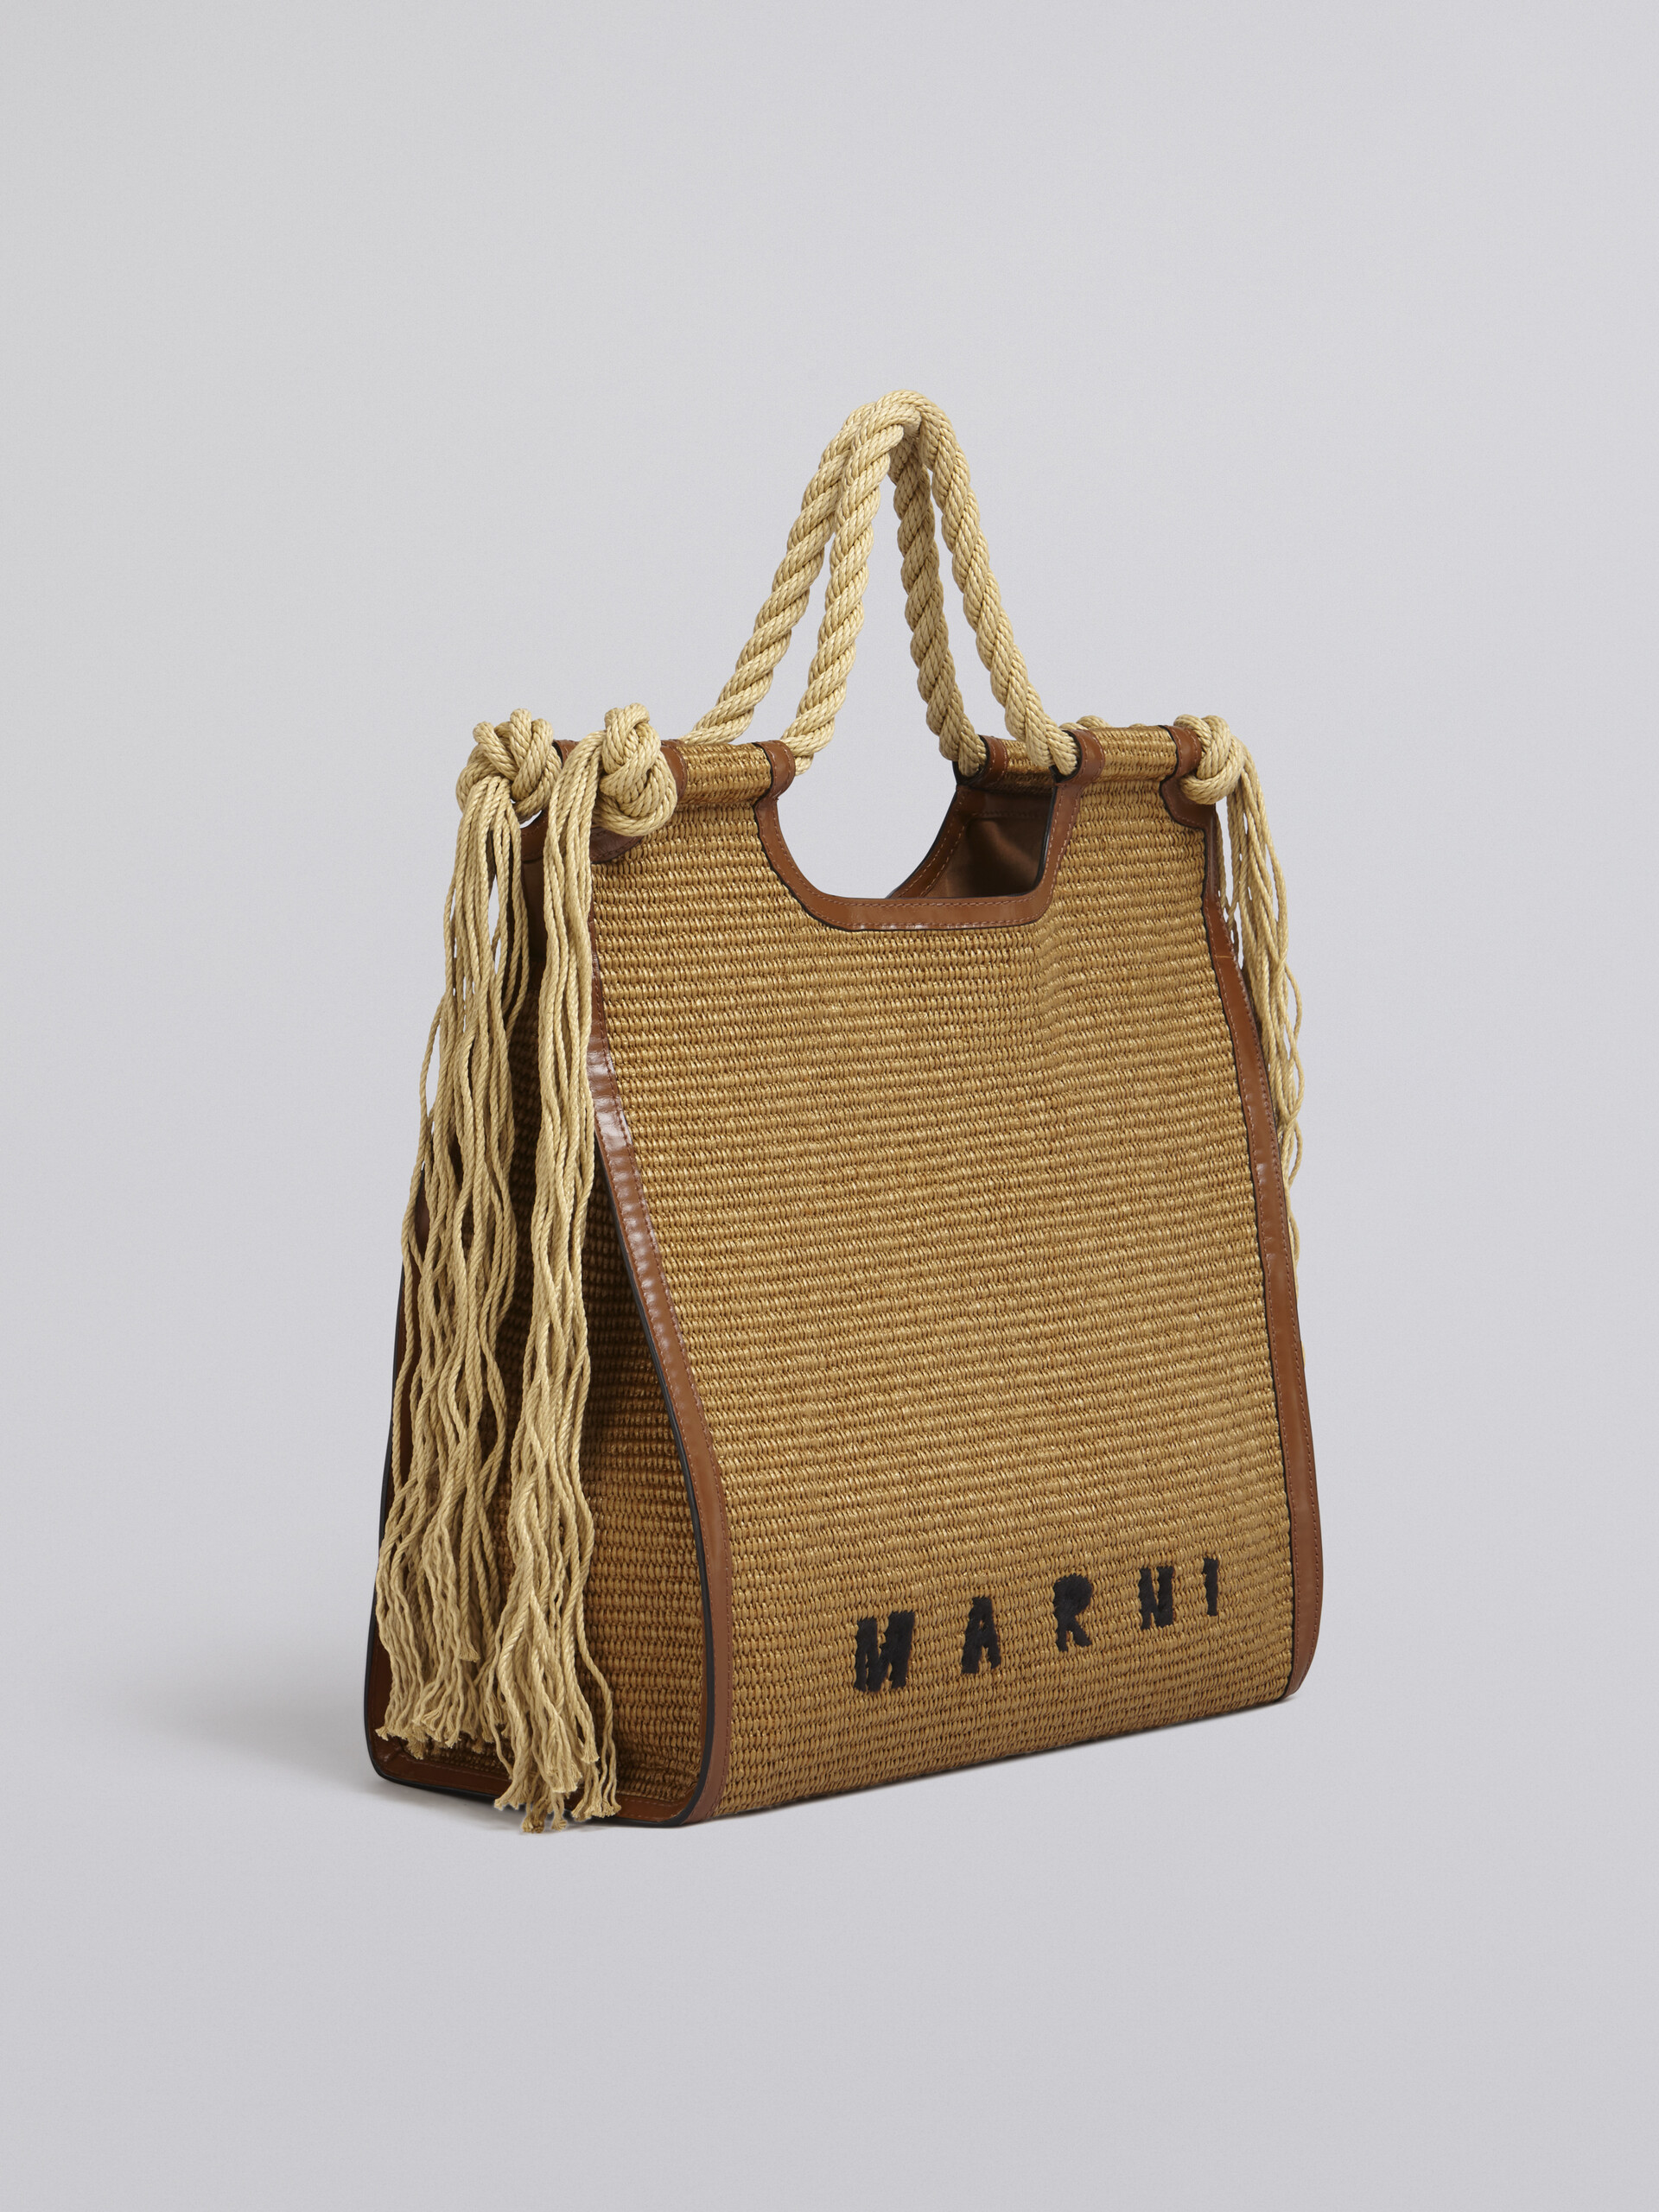 MARCEL summer bag in raffia-effect fabric, with brown leather and rope handles - Handbags - Image 6